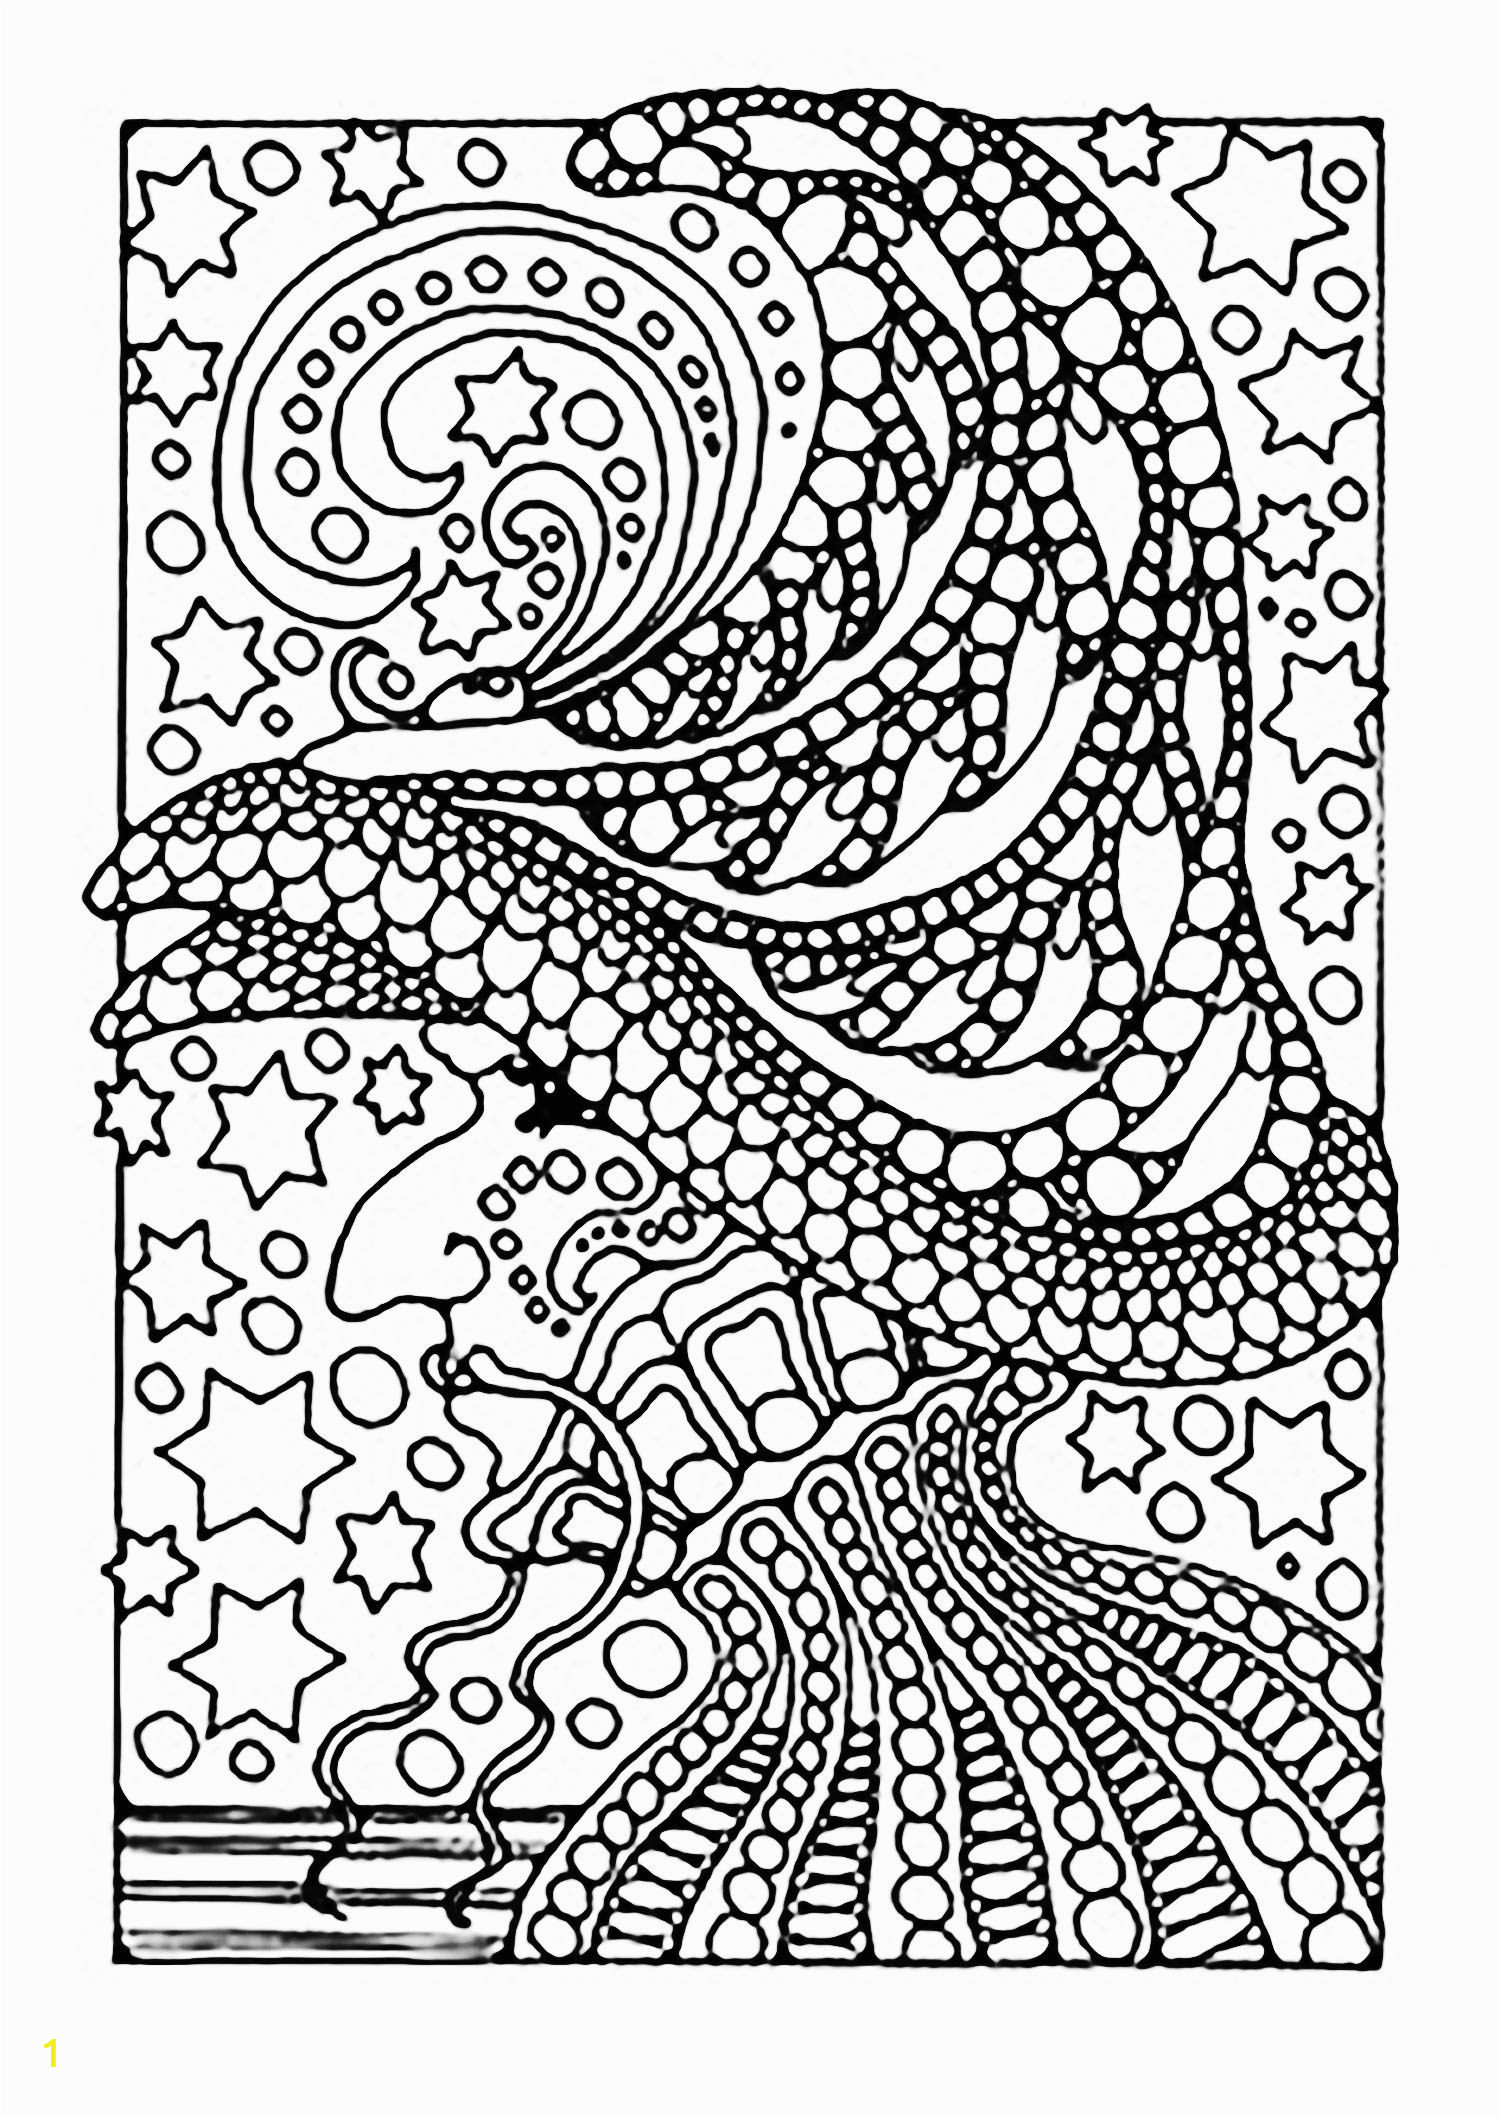 Printable Scary Halloween Coloring Pages A Scary Witch Color All these Stars From the Gallery